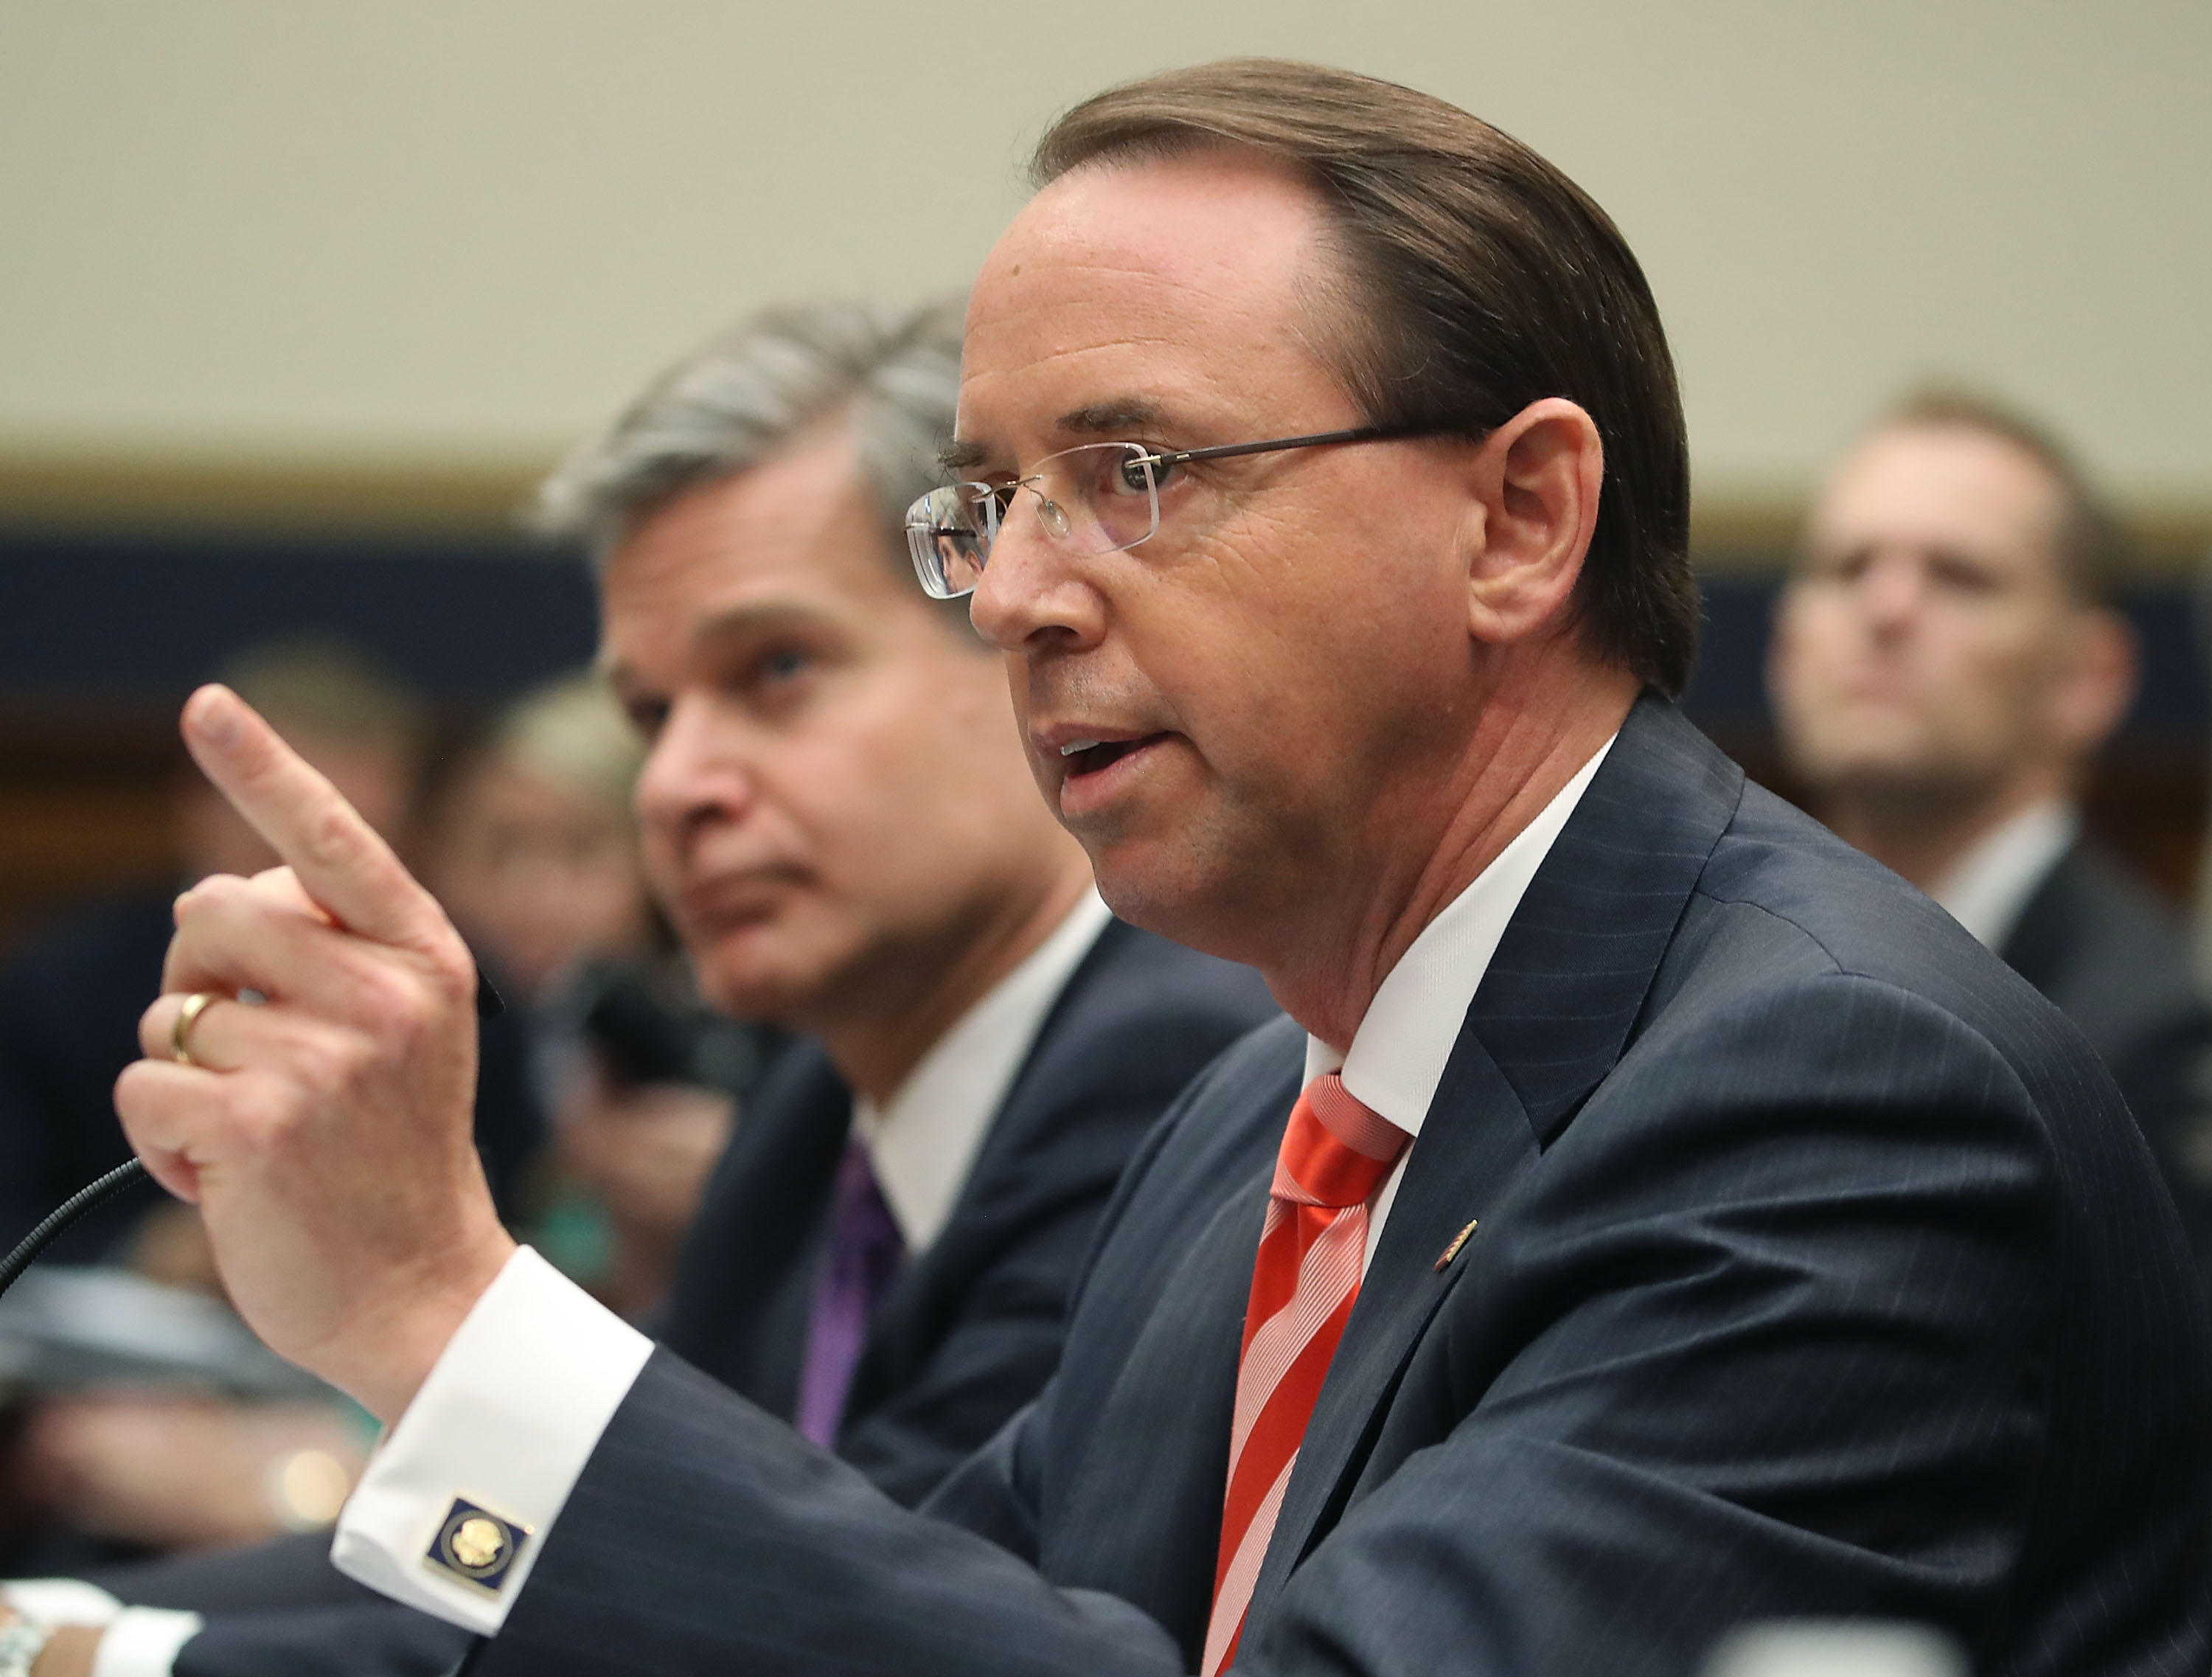 Rod hearing: Deputy Attorney General told "Get your act together" by Jim at House hearing today News